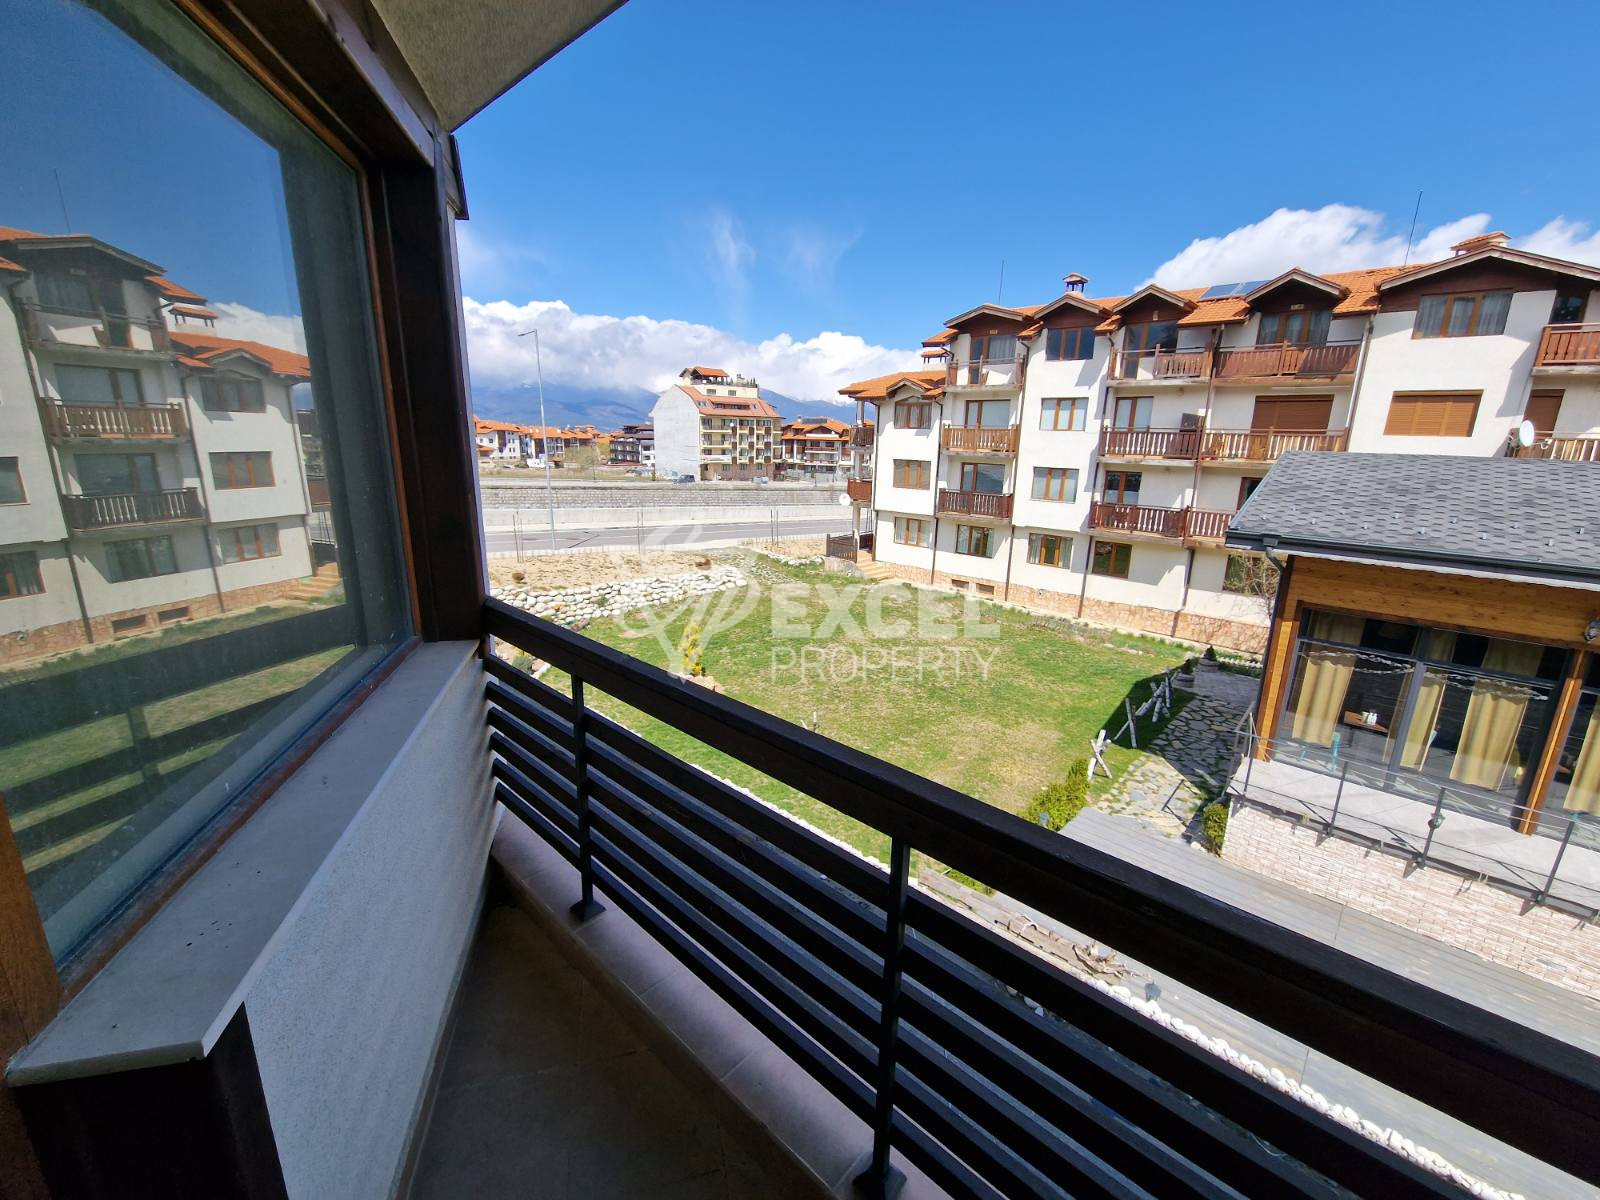 Studio with a terrace for sale in Bansko next to the Gondola